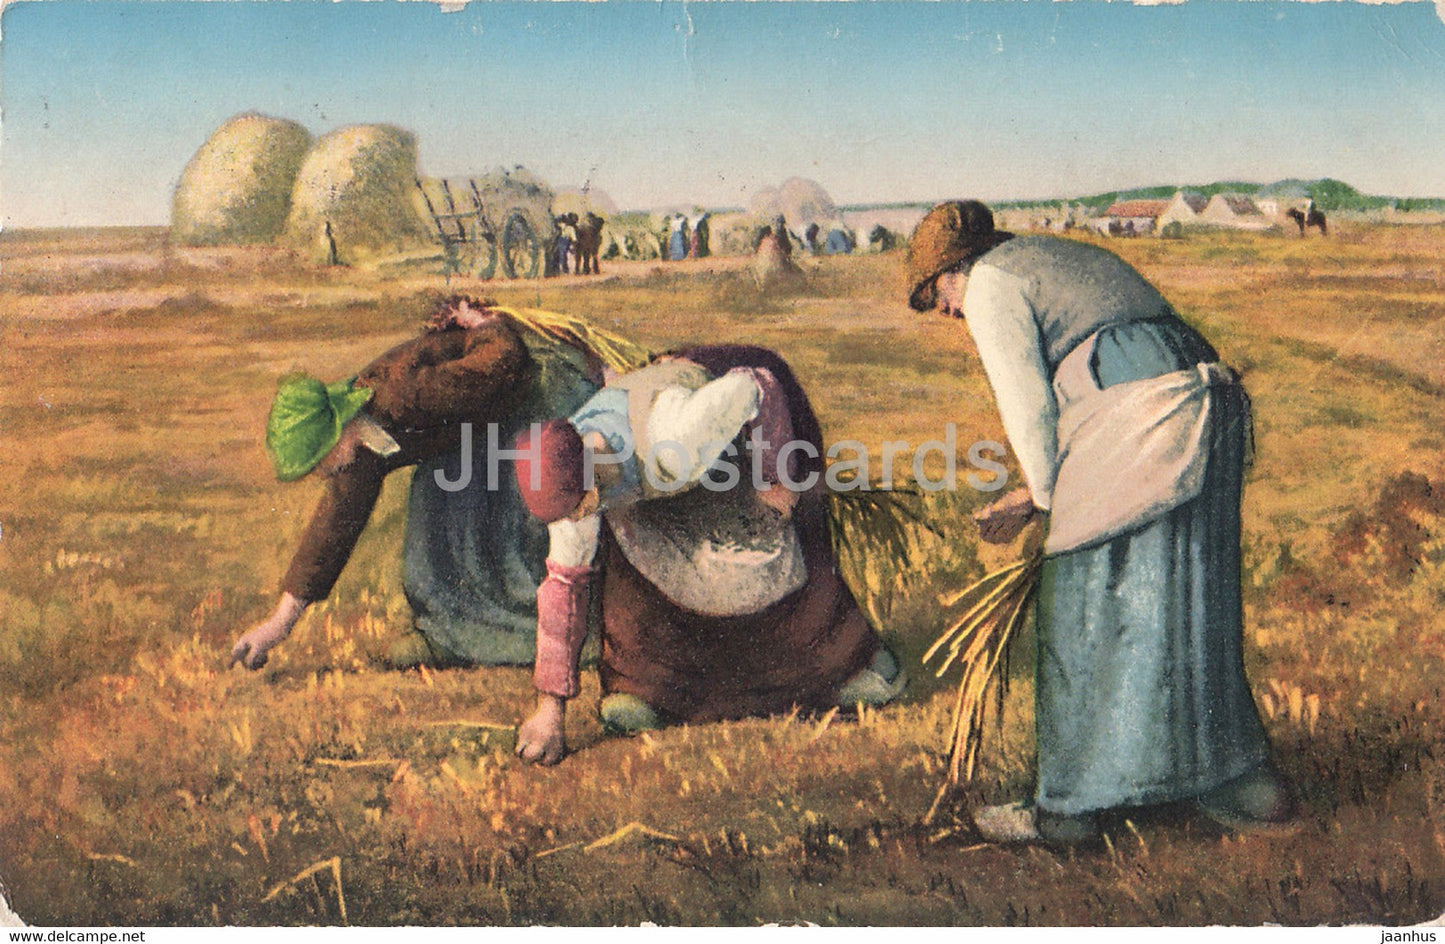 painting by Jean-Francois Millet - La Glaneuses - The Gleaners - French art - old postcard - 1926 - used - JH Postcards